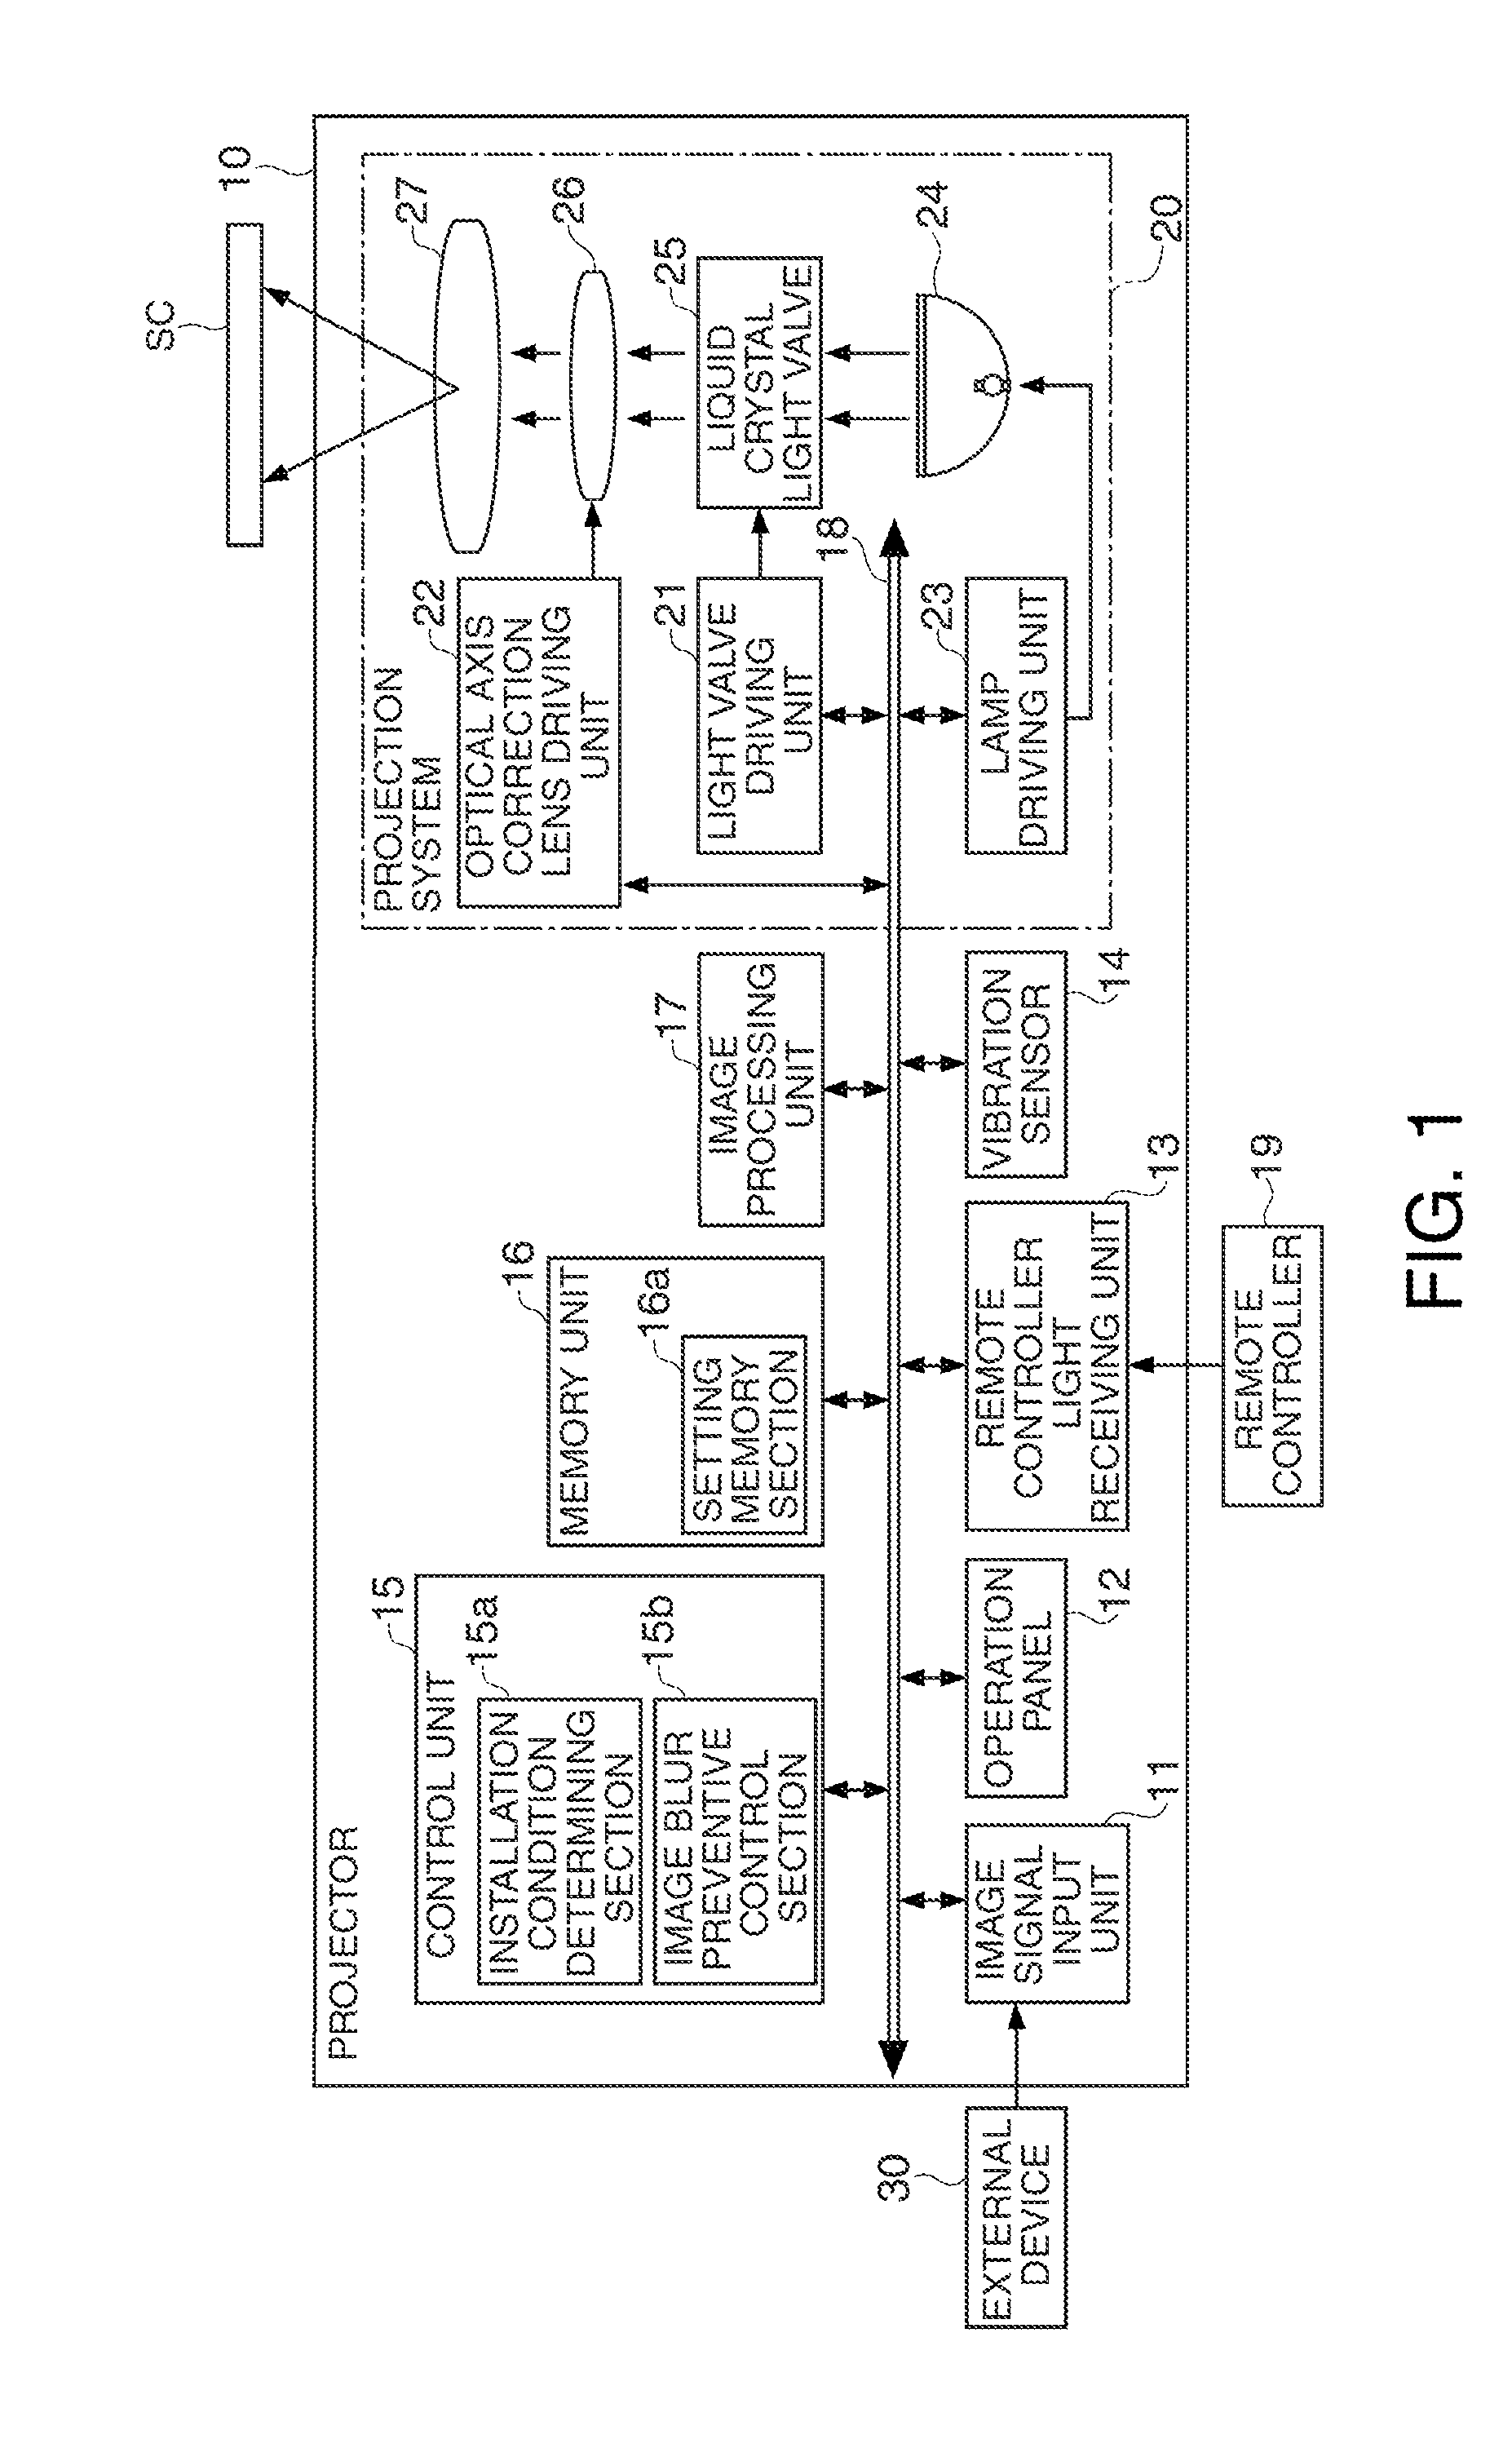 Projection apparatus and image blur preventive control method for projection apparatus